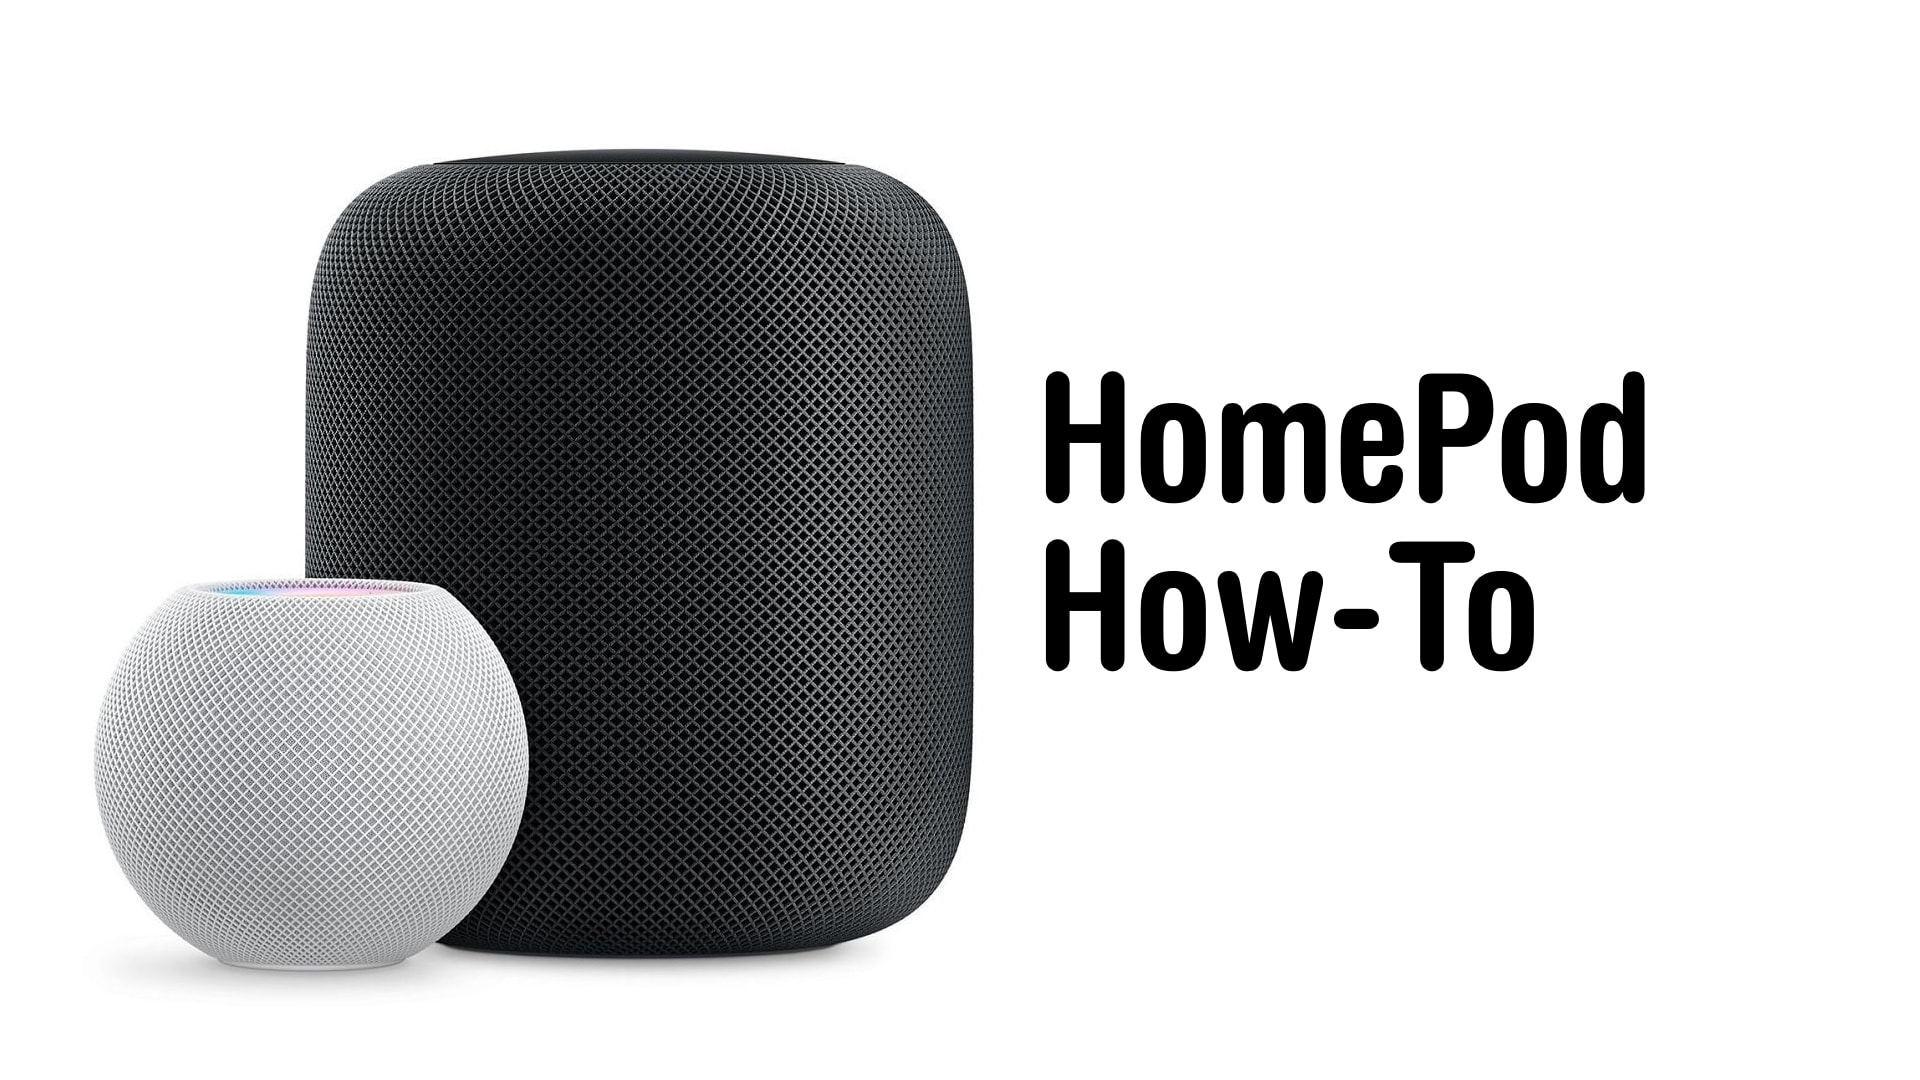 How to get the latest HomePod 17.2 software update